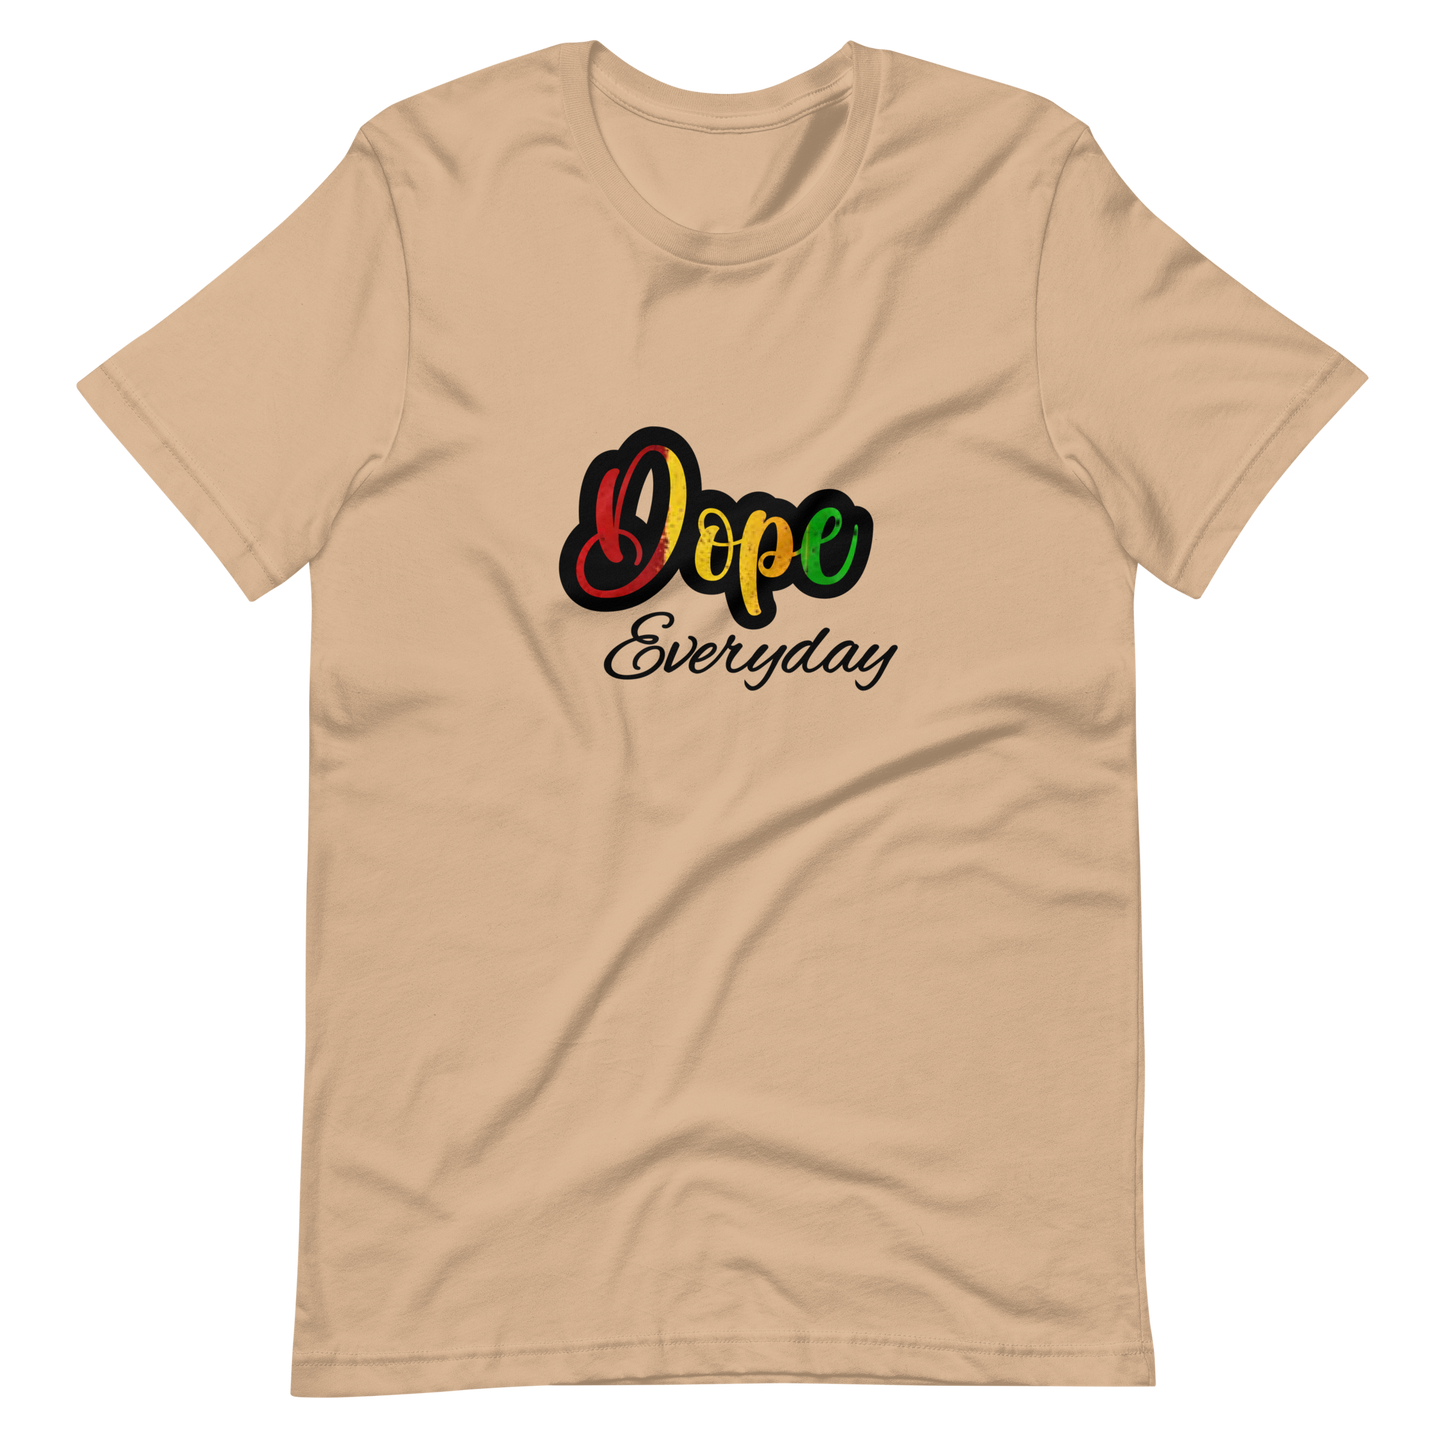 DOPE EVERYDAY Limited Edition